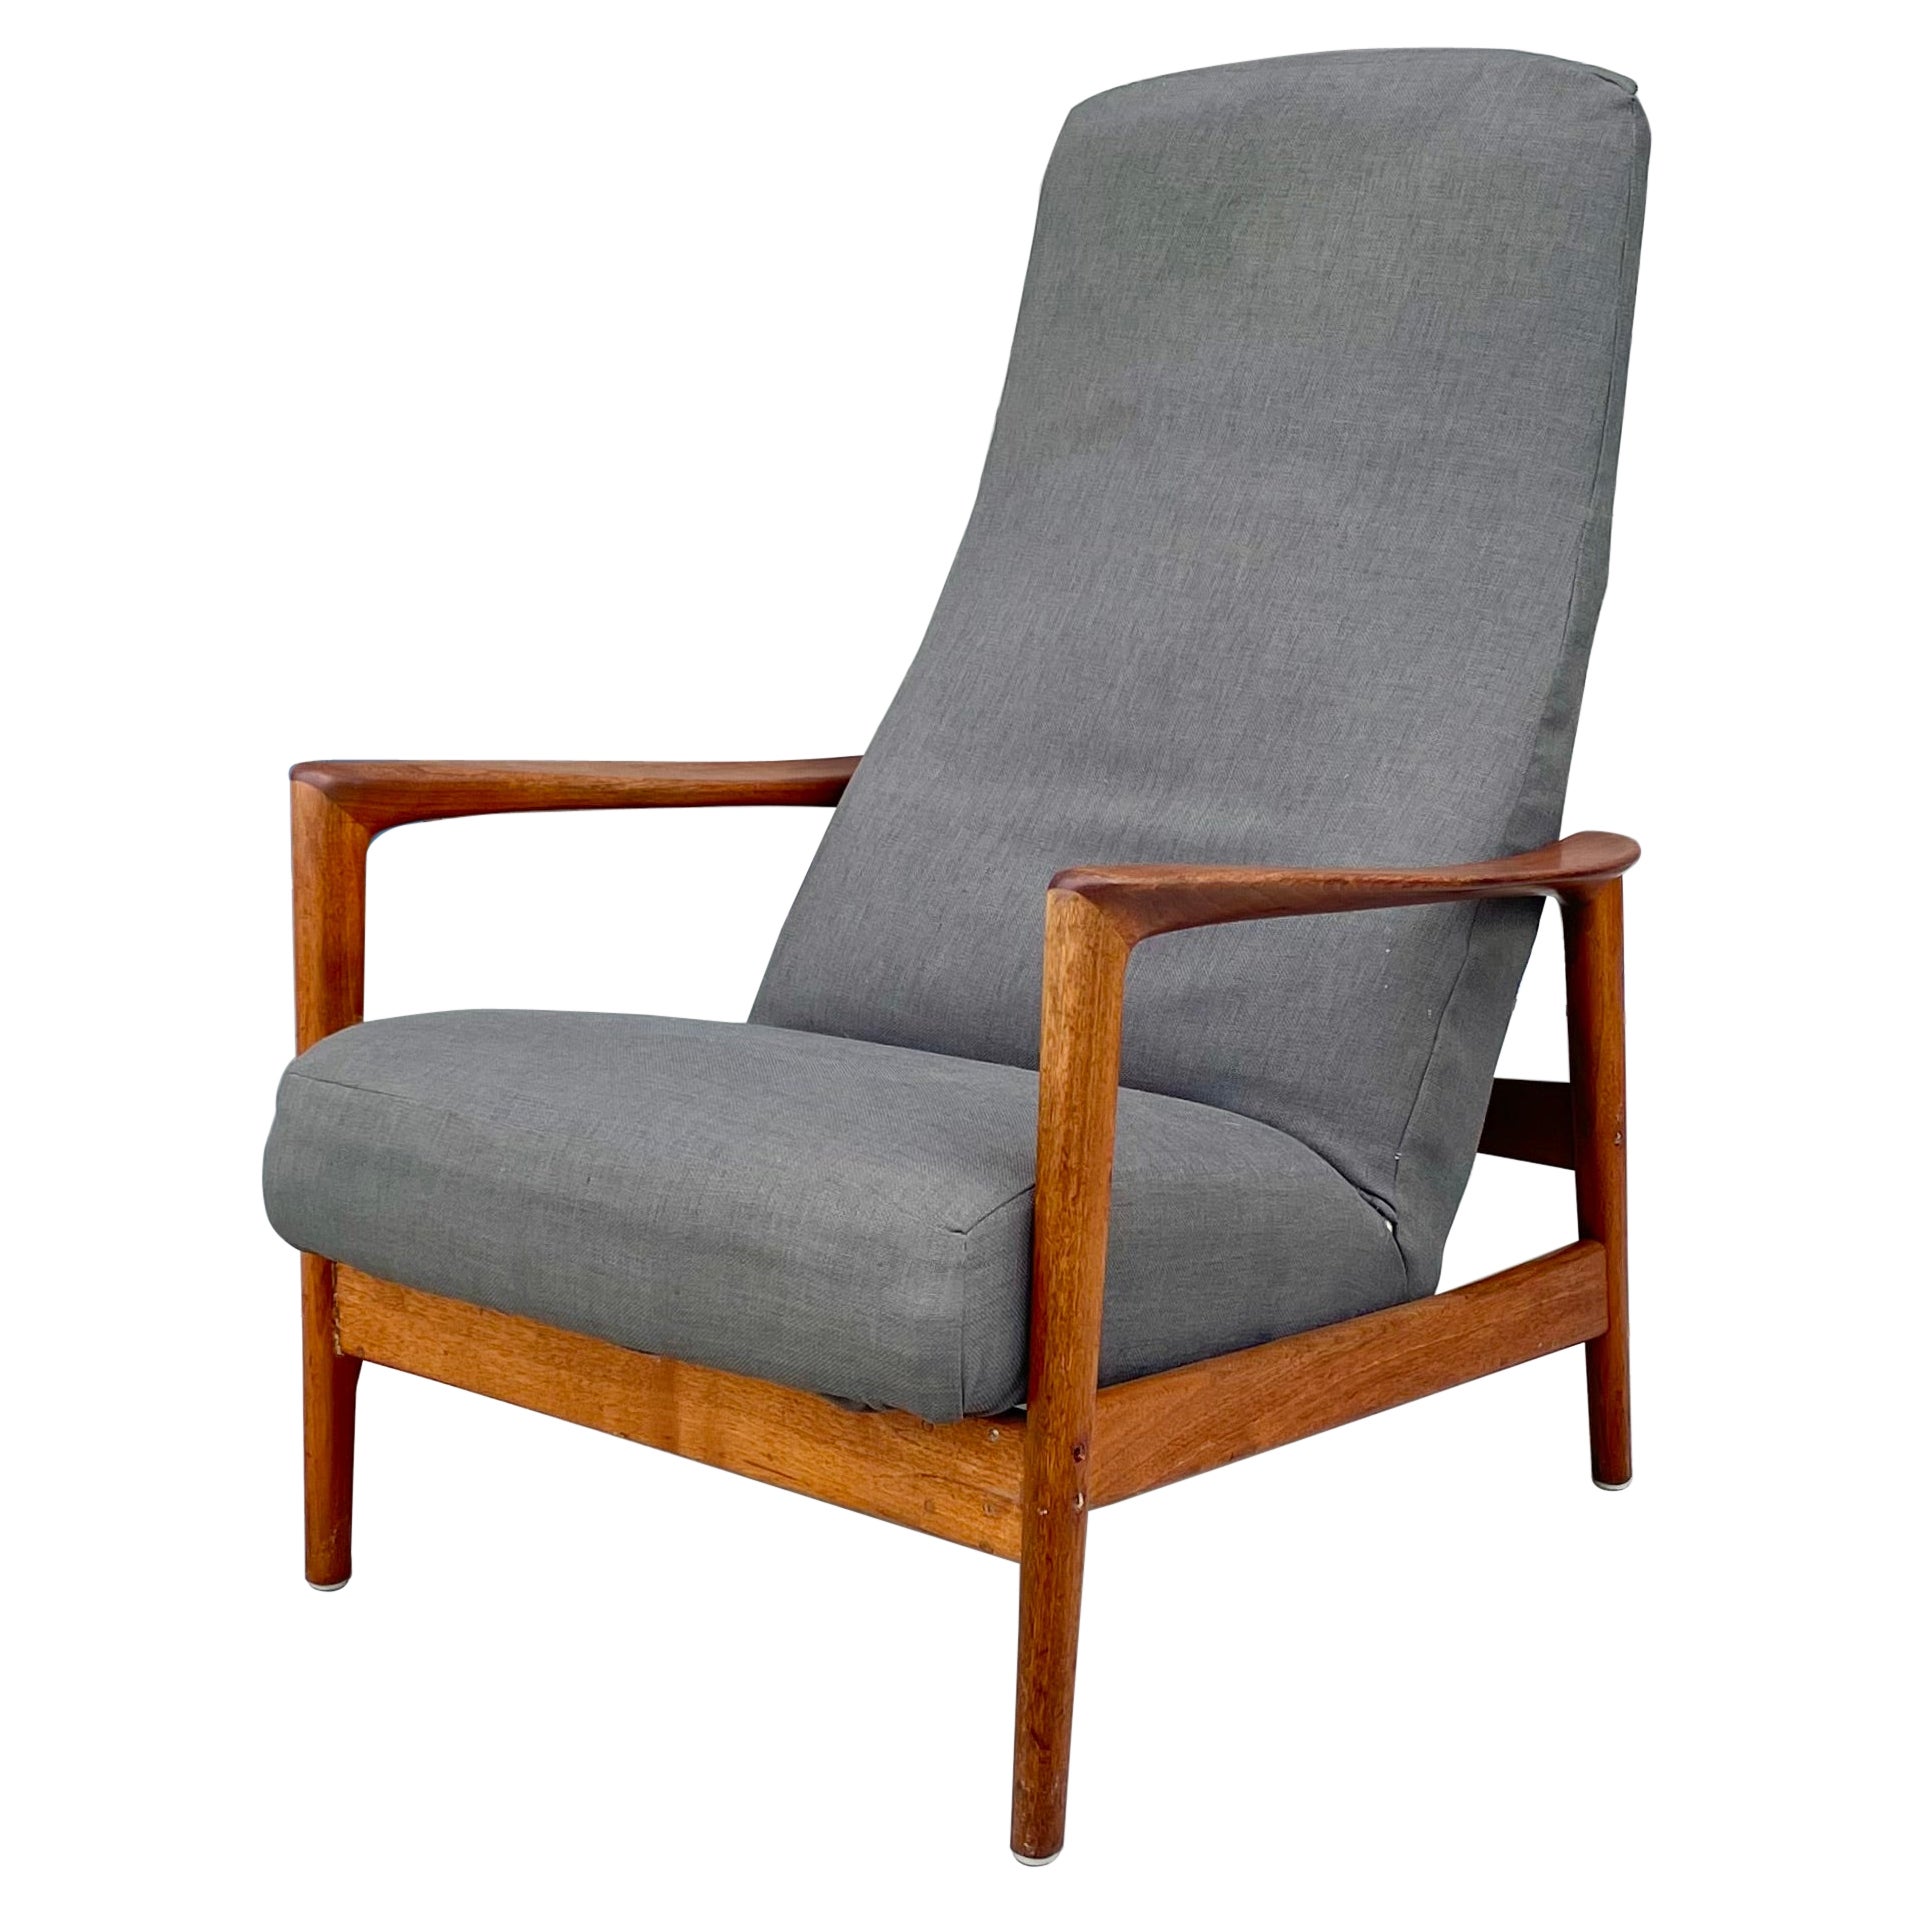 1960s Mid Century Walnut Recliner by Folke Ohlsson for Dux